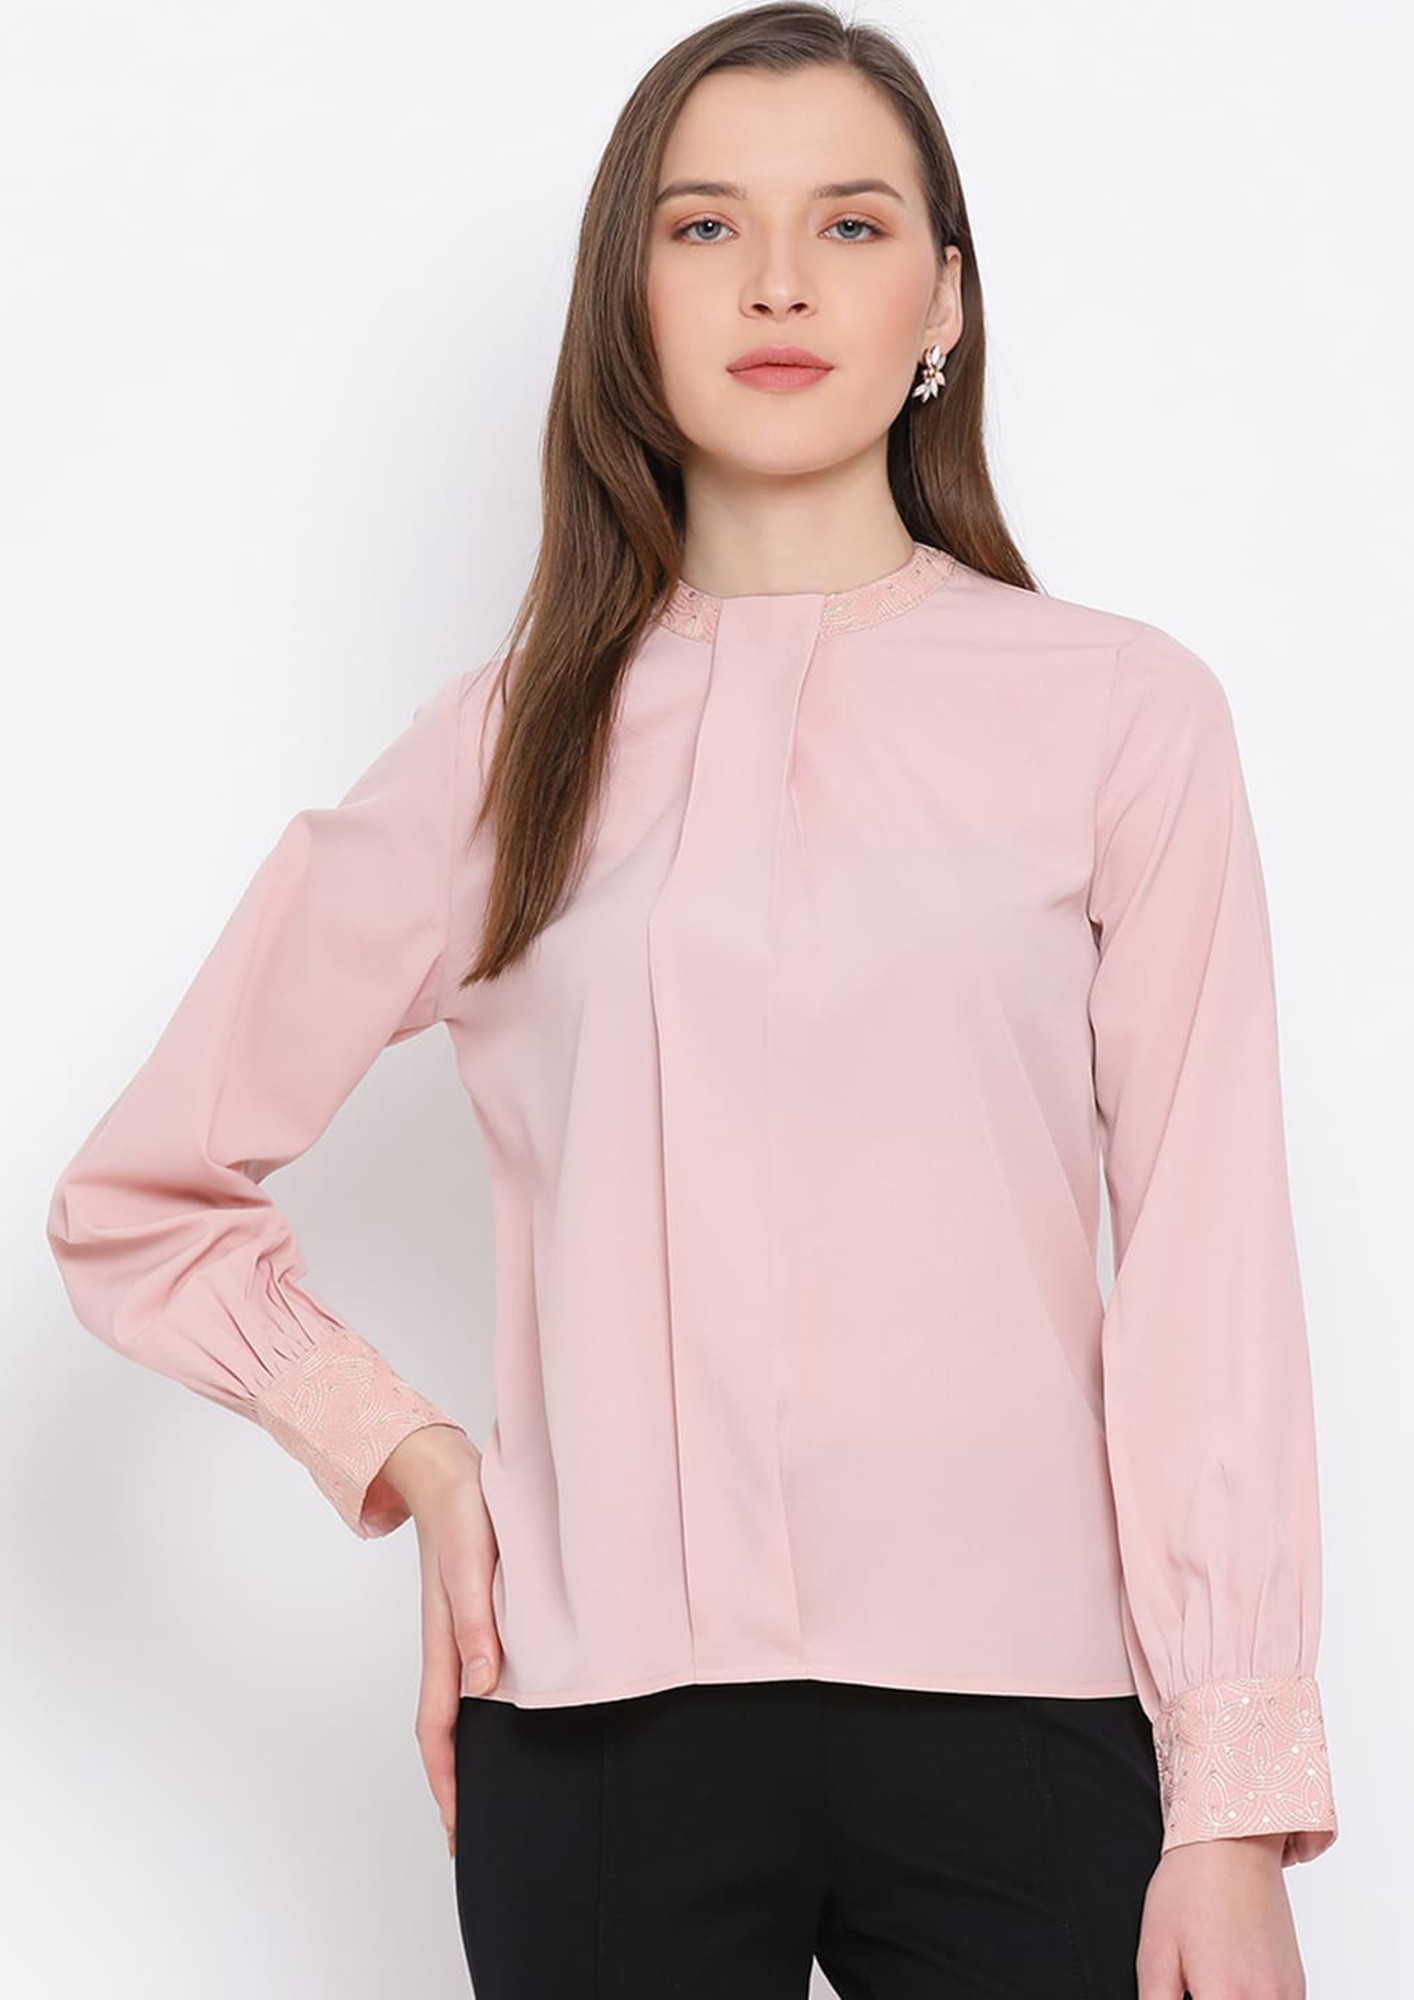 Draax Fashions Women Pink Solid Top